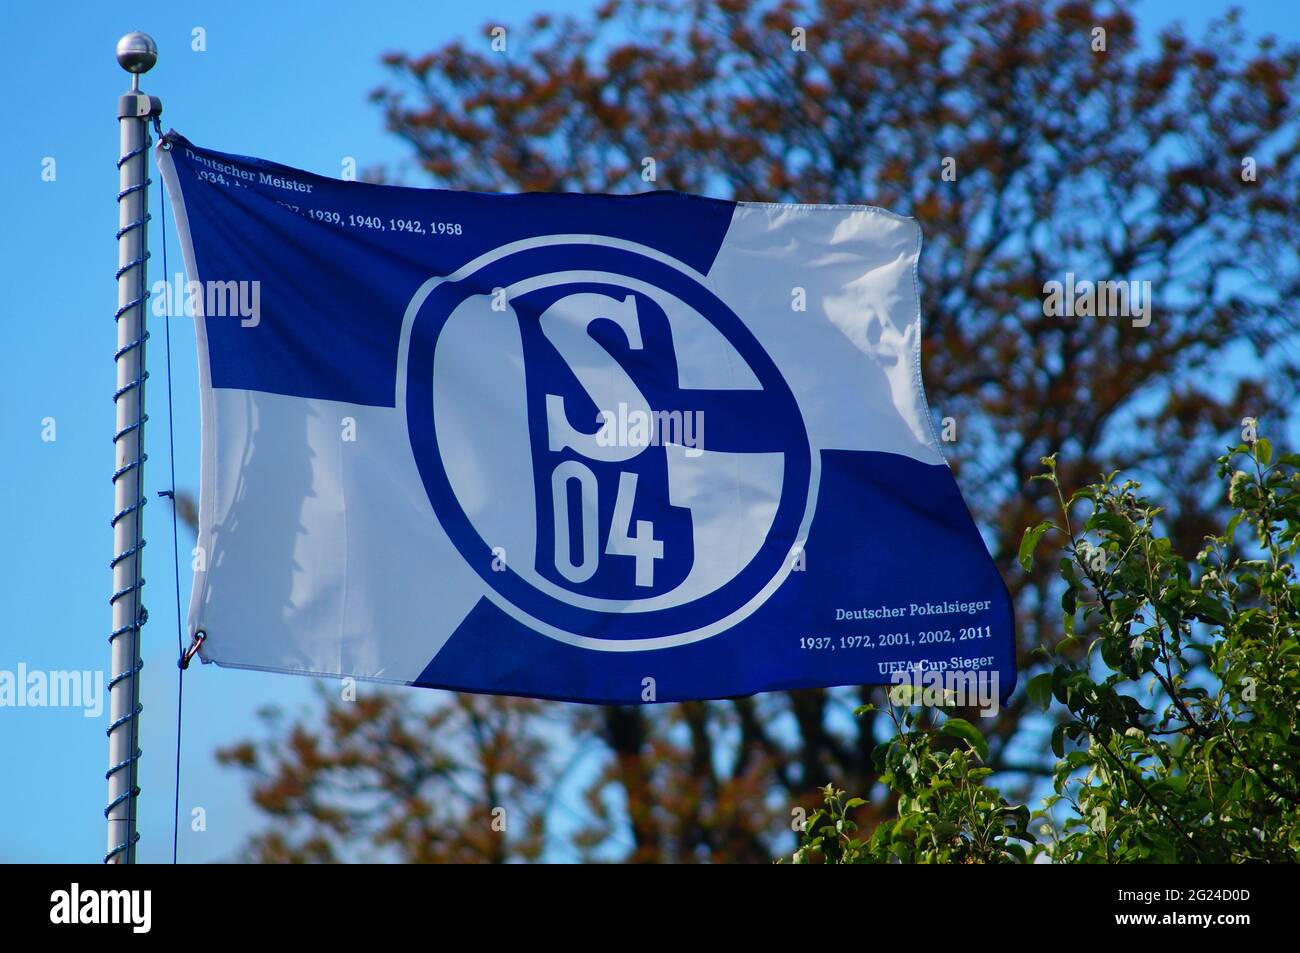 FRANKFURT, GERMANY - May 26, 2021: A Schalke 04 flag flies in an allotment garden in Frankfurt. After 30 years in the 1st Bundesliga, relegation to th Stock Photo